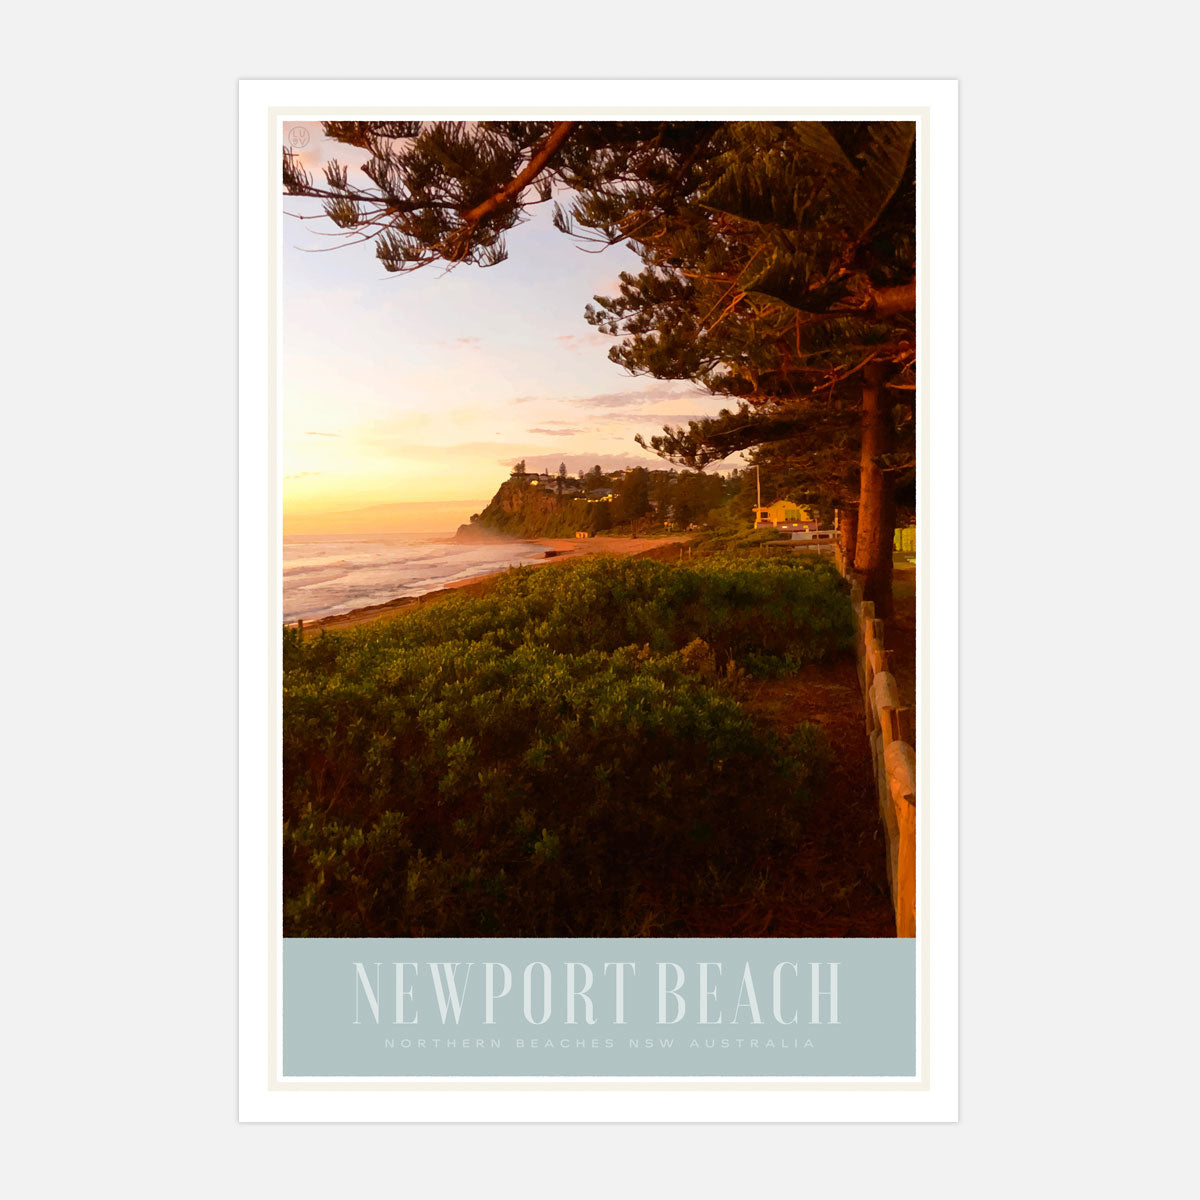 Newport beach retro vintage poster from places we luv